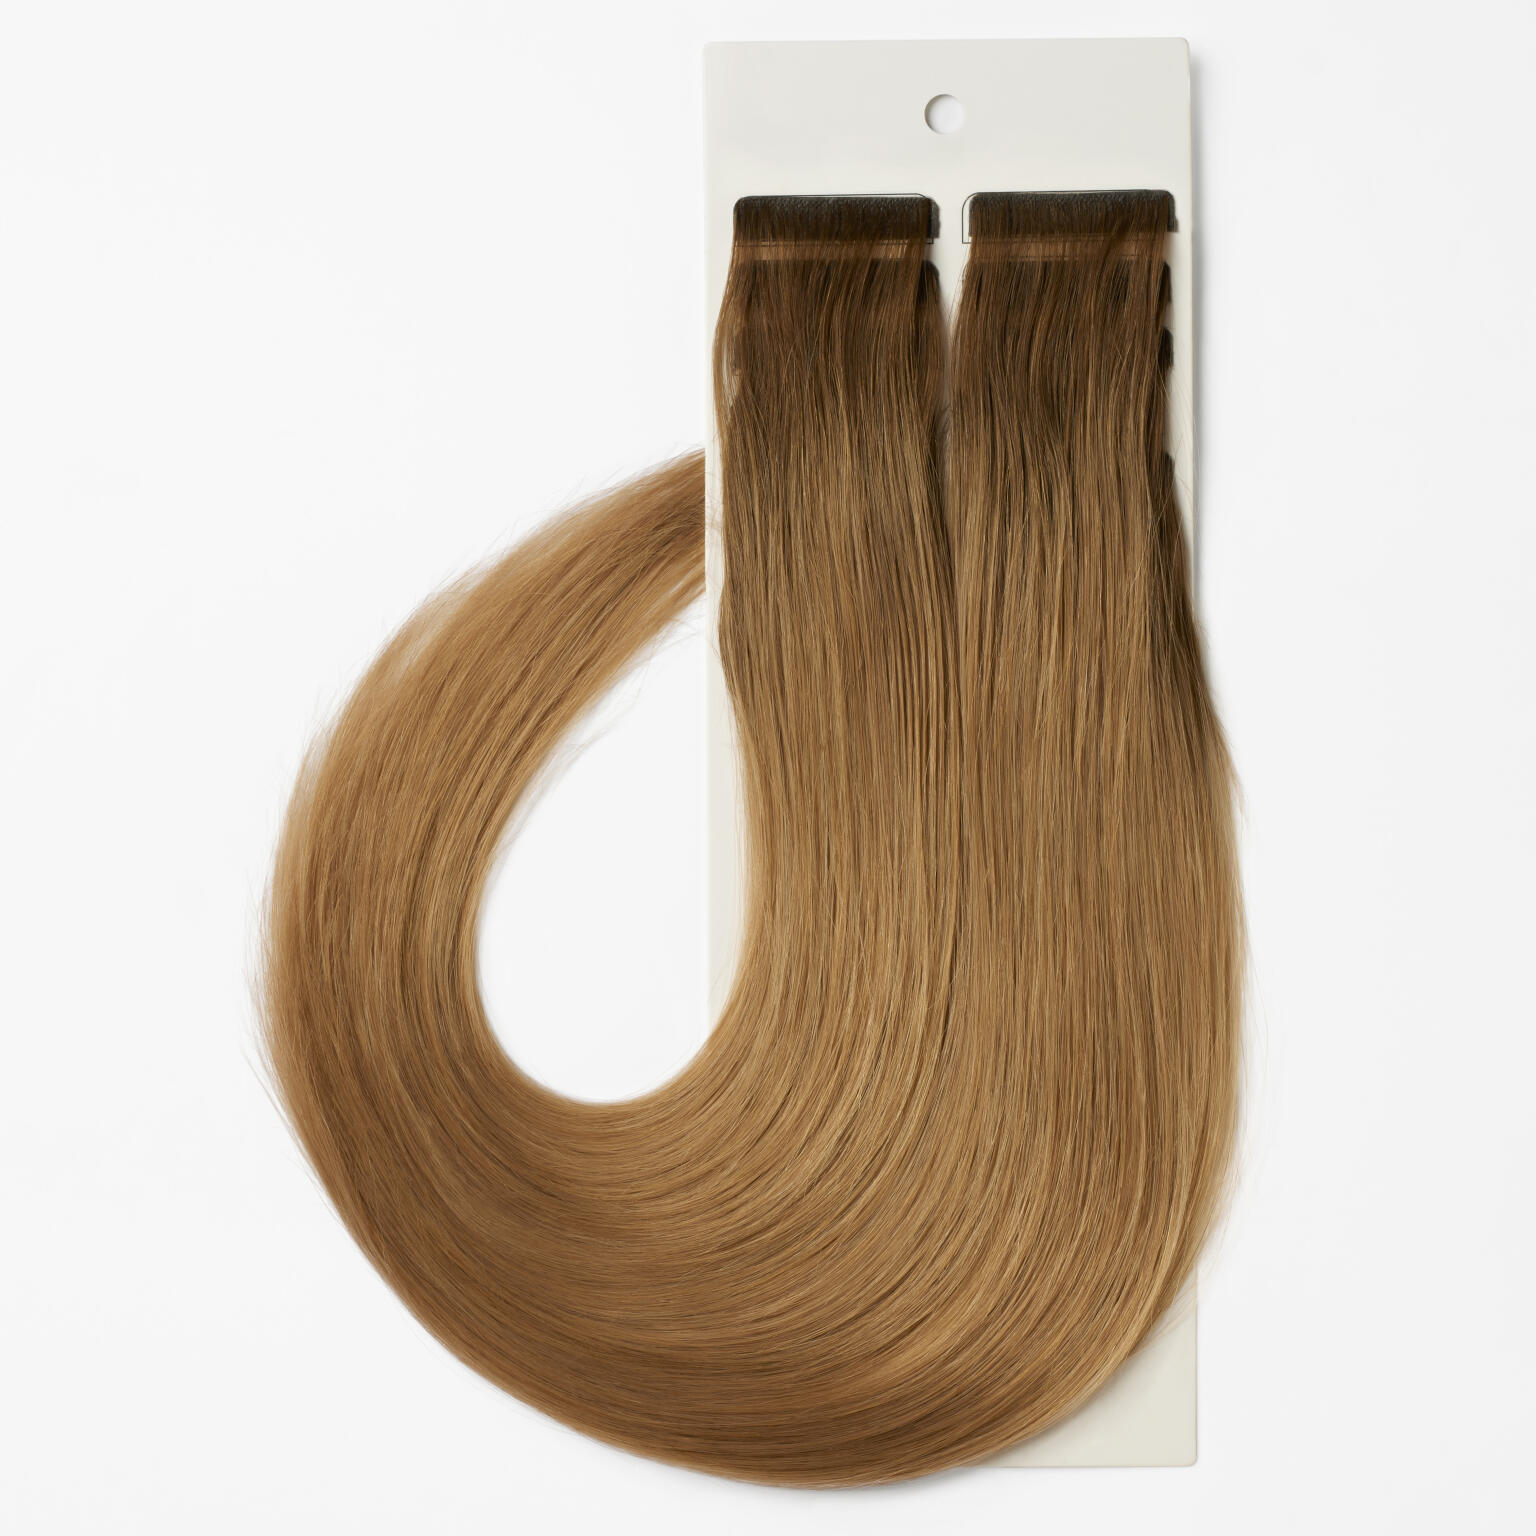 Luxe Tape Extensions Seamless 4 CM6.3/9.93 30 cm